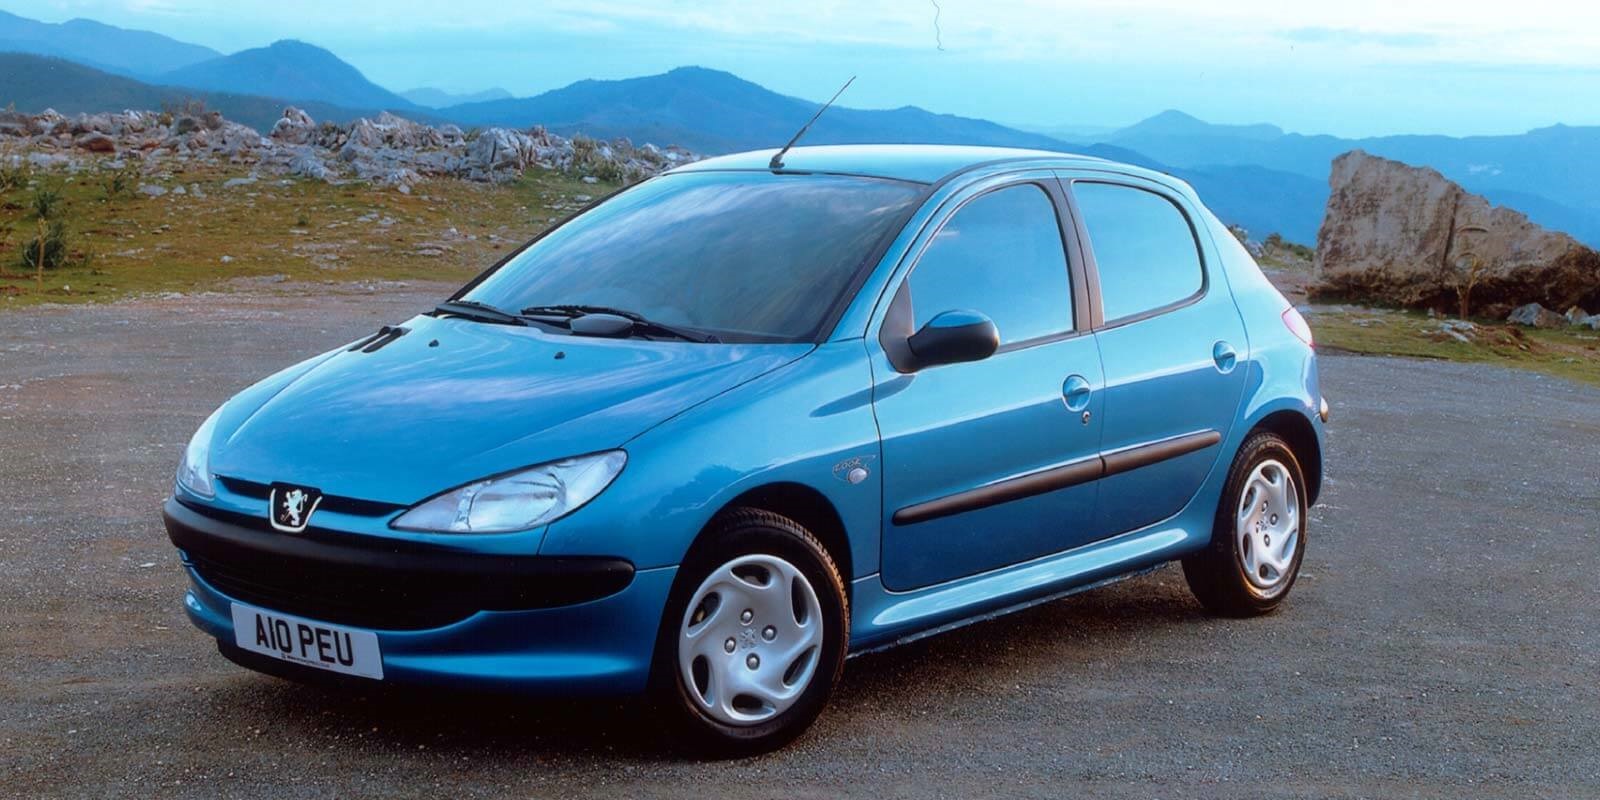 Amazing Peugeot 206 Pictures & Backgrounds